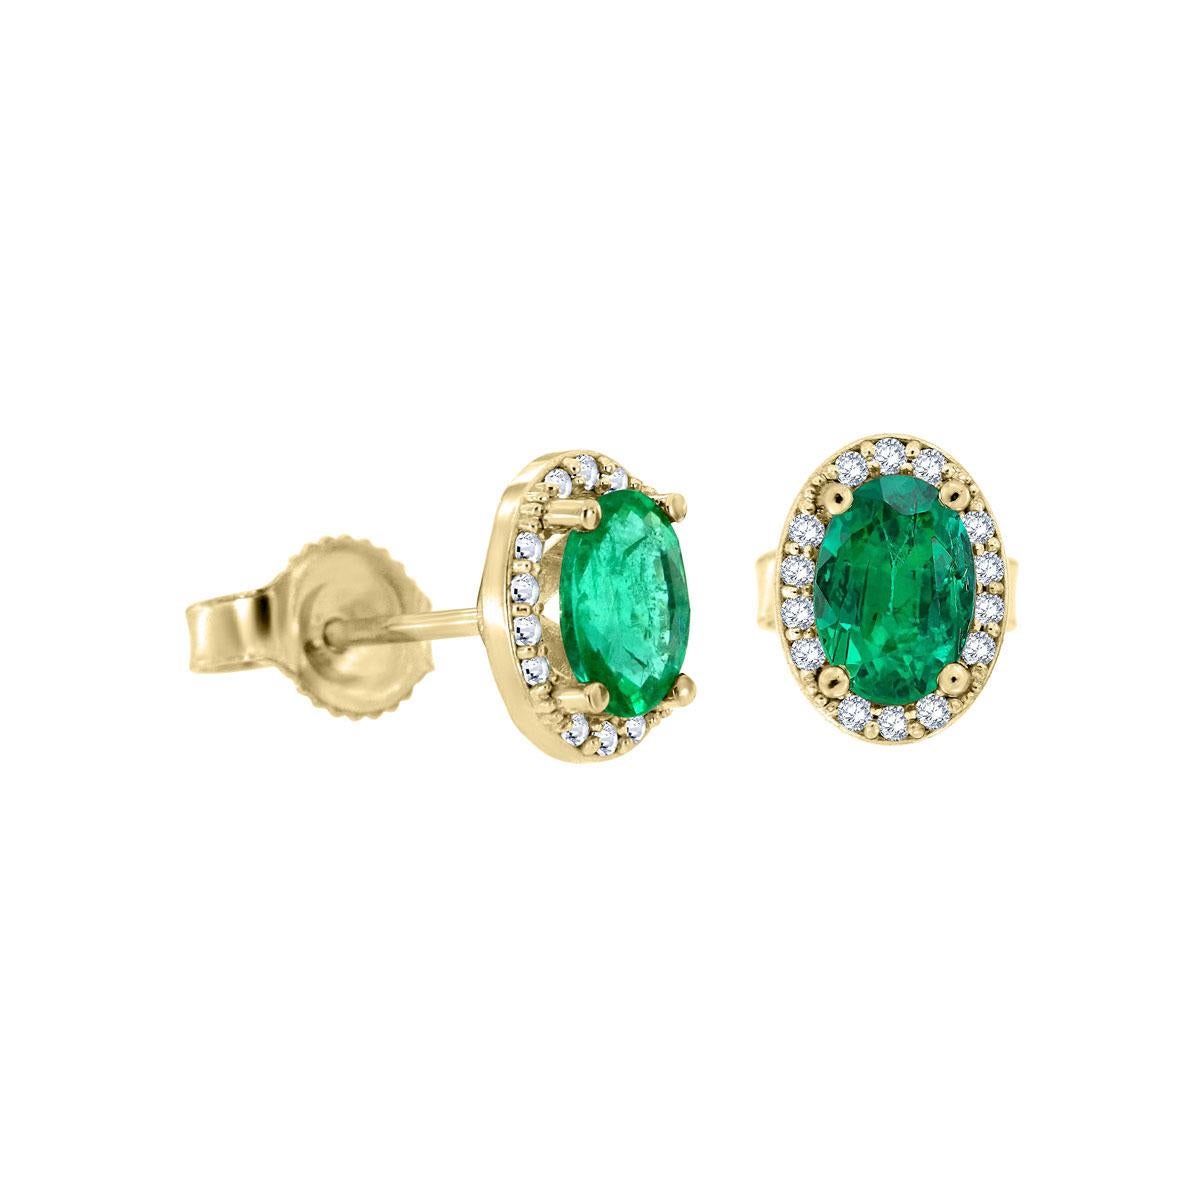 Round Cut 14 Karat Yellow Gold Halo Diamonds and Emeralds Earrings '4/5 Carat' For Sale